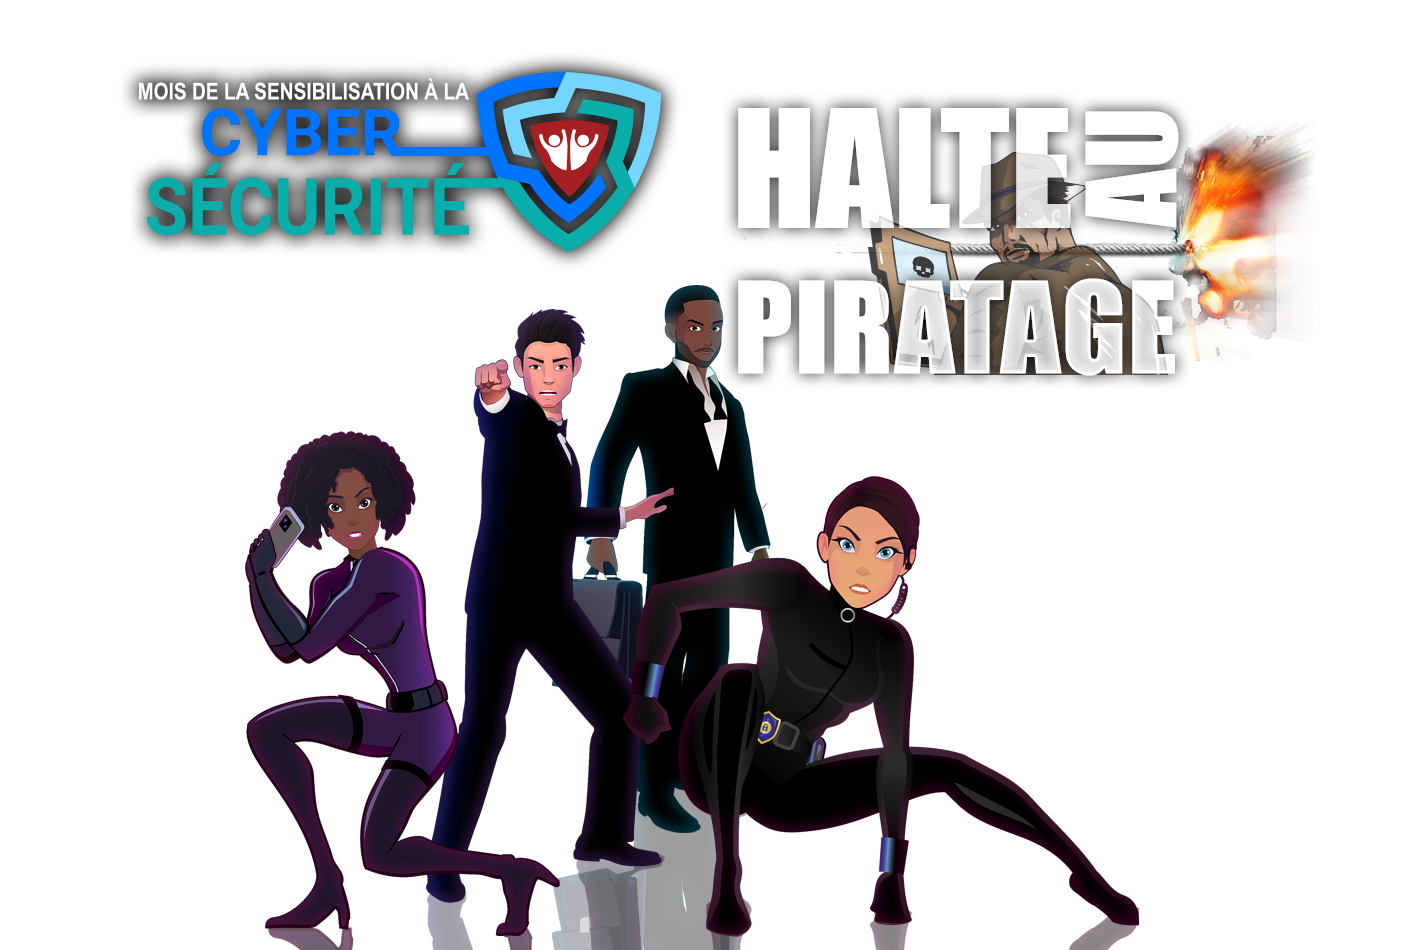 characters for halt the hack posing